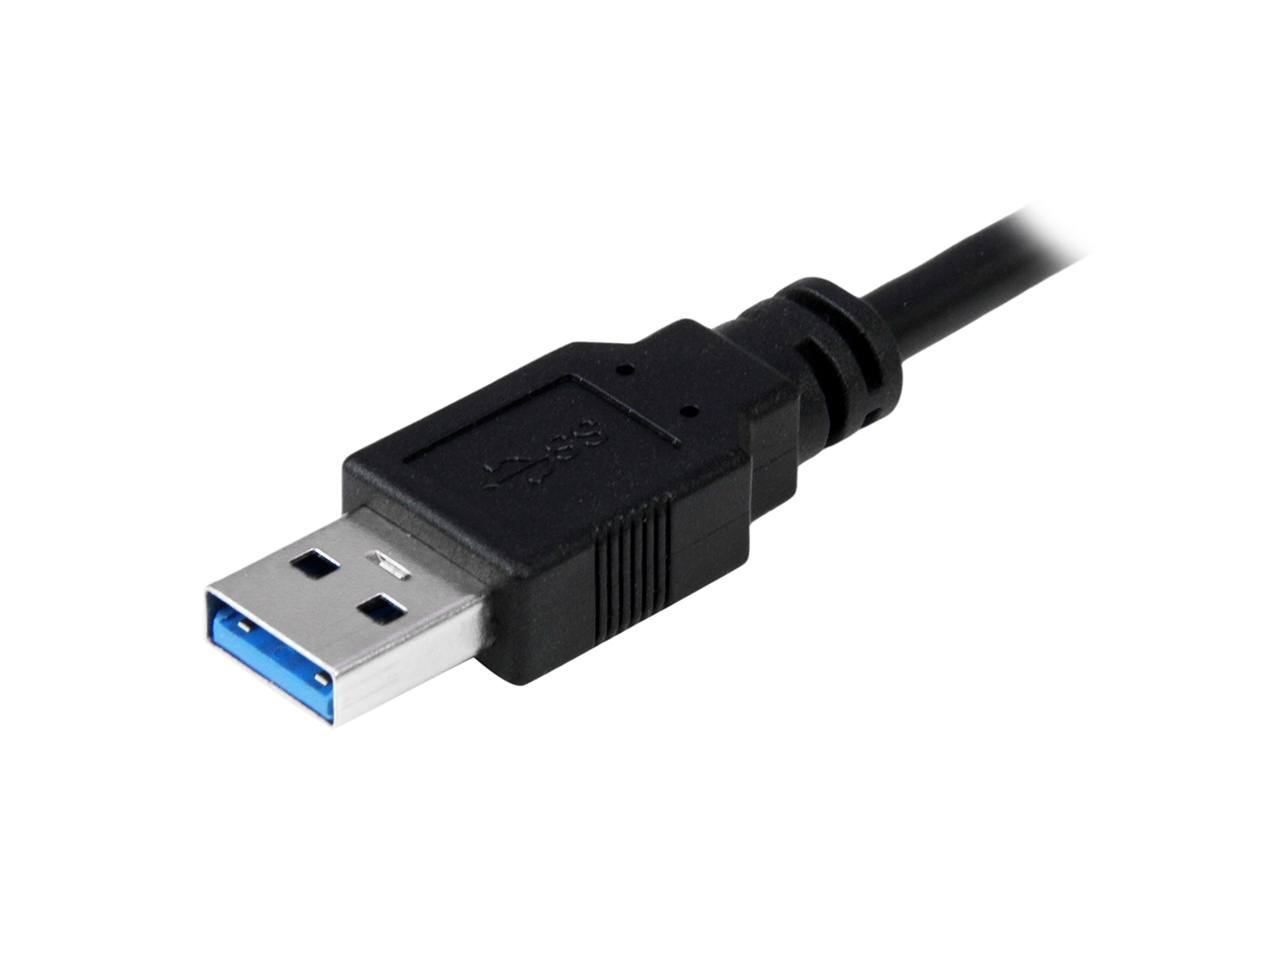 SATA to USB Adapter - Hannord USB 3.0 to 2.5 3.5 SATA III Hard Drive  Adapter - External Transfer Cable for SSD/HDD Support UASP, with 12V 2A  Power Adapter 